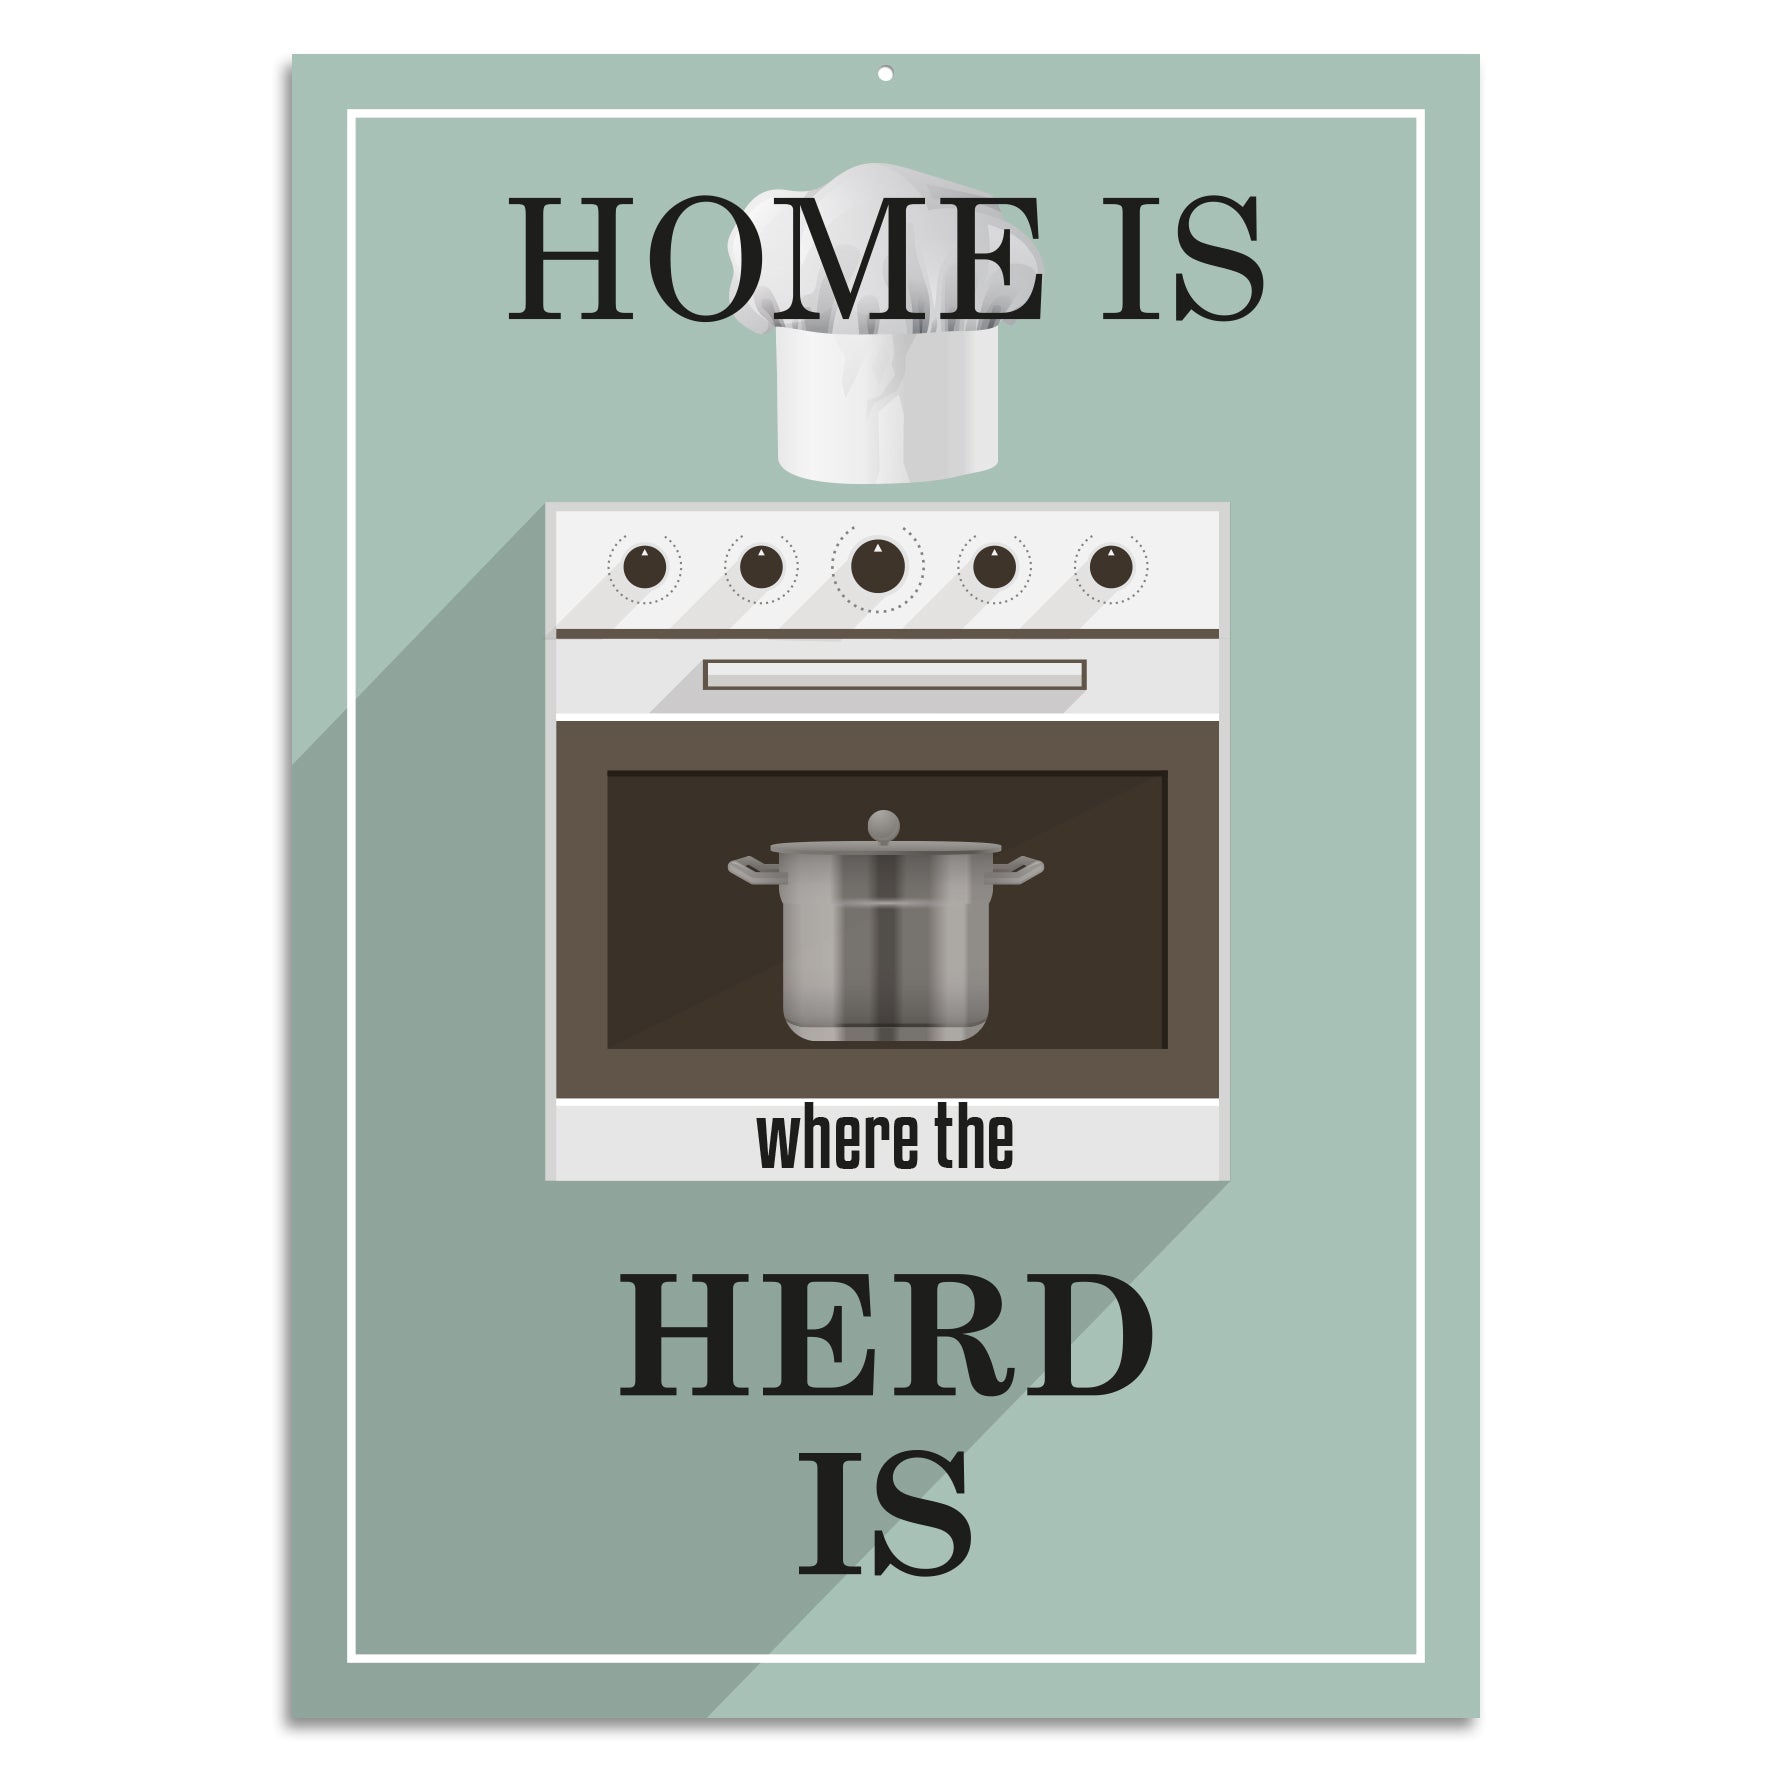 Blechschild - Home is where the Herd is